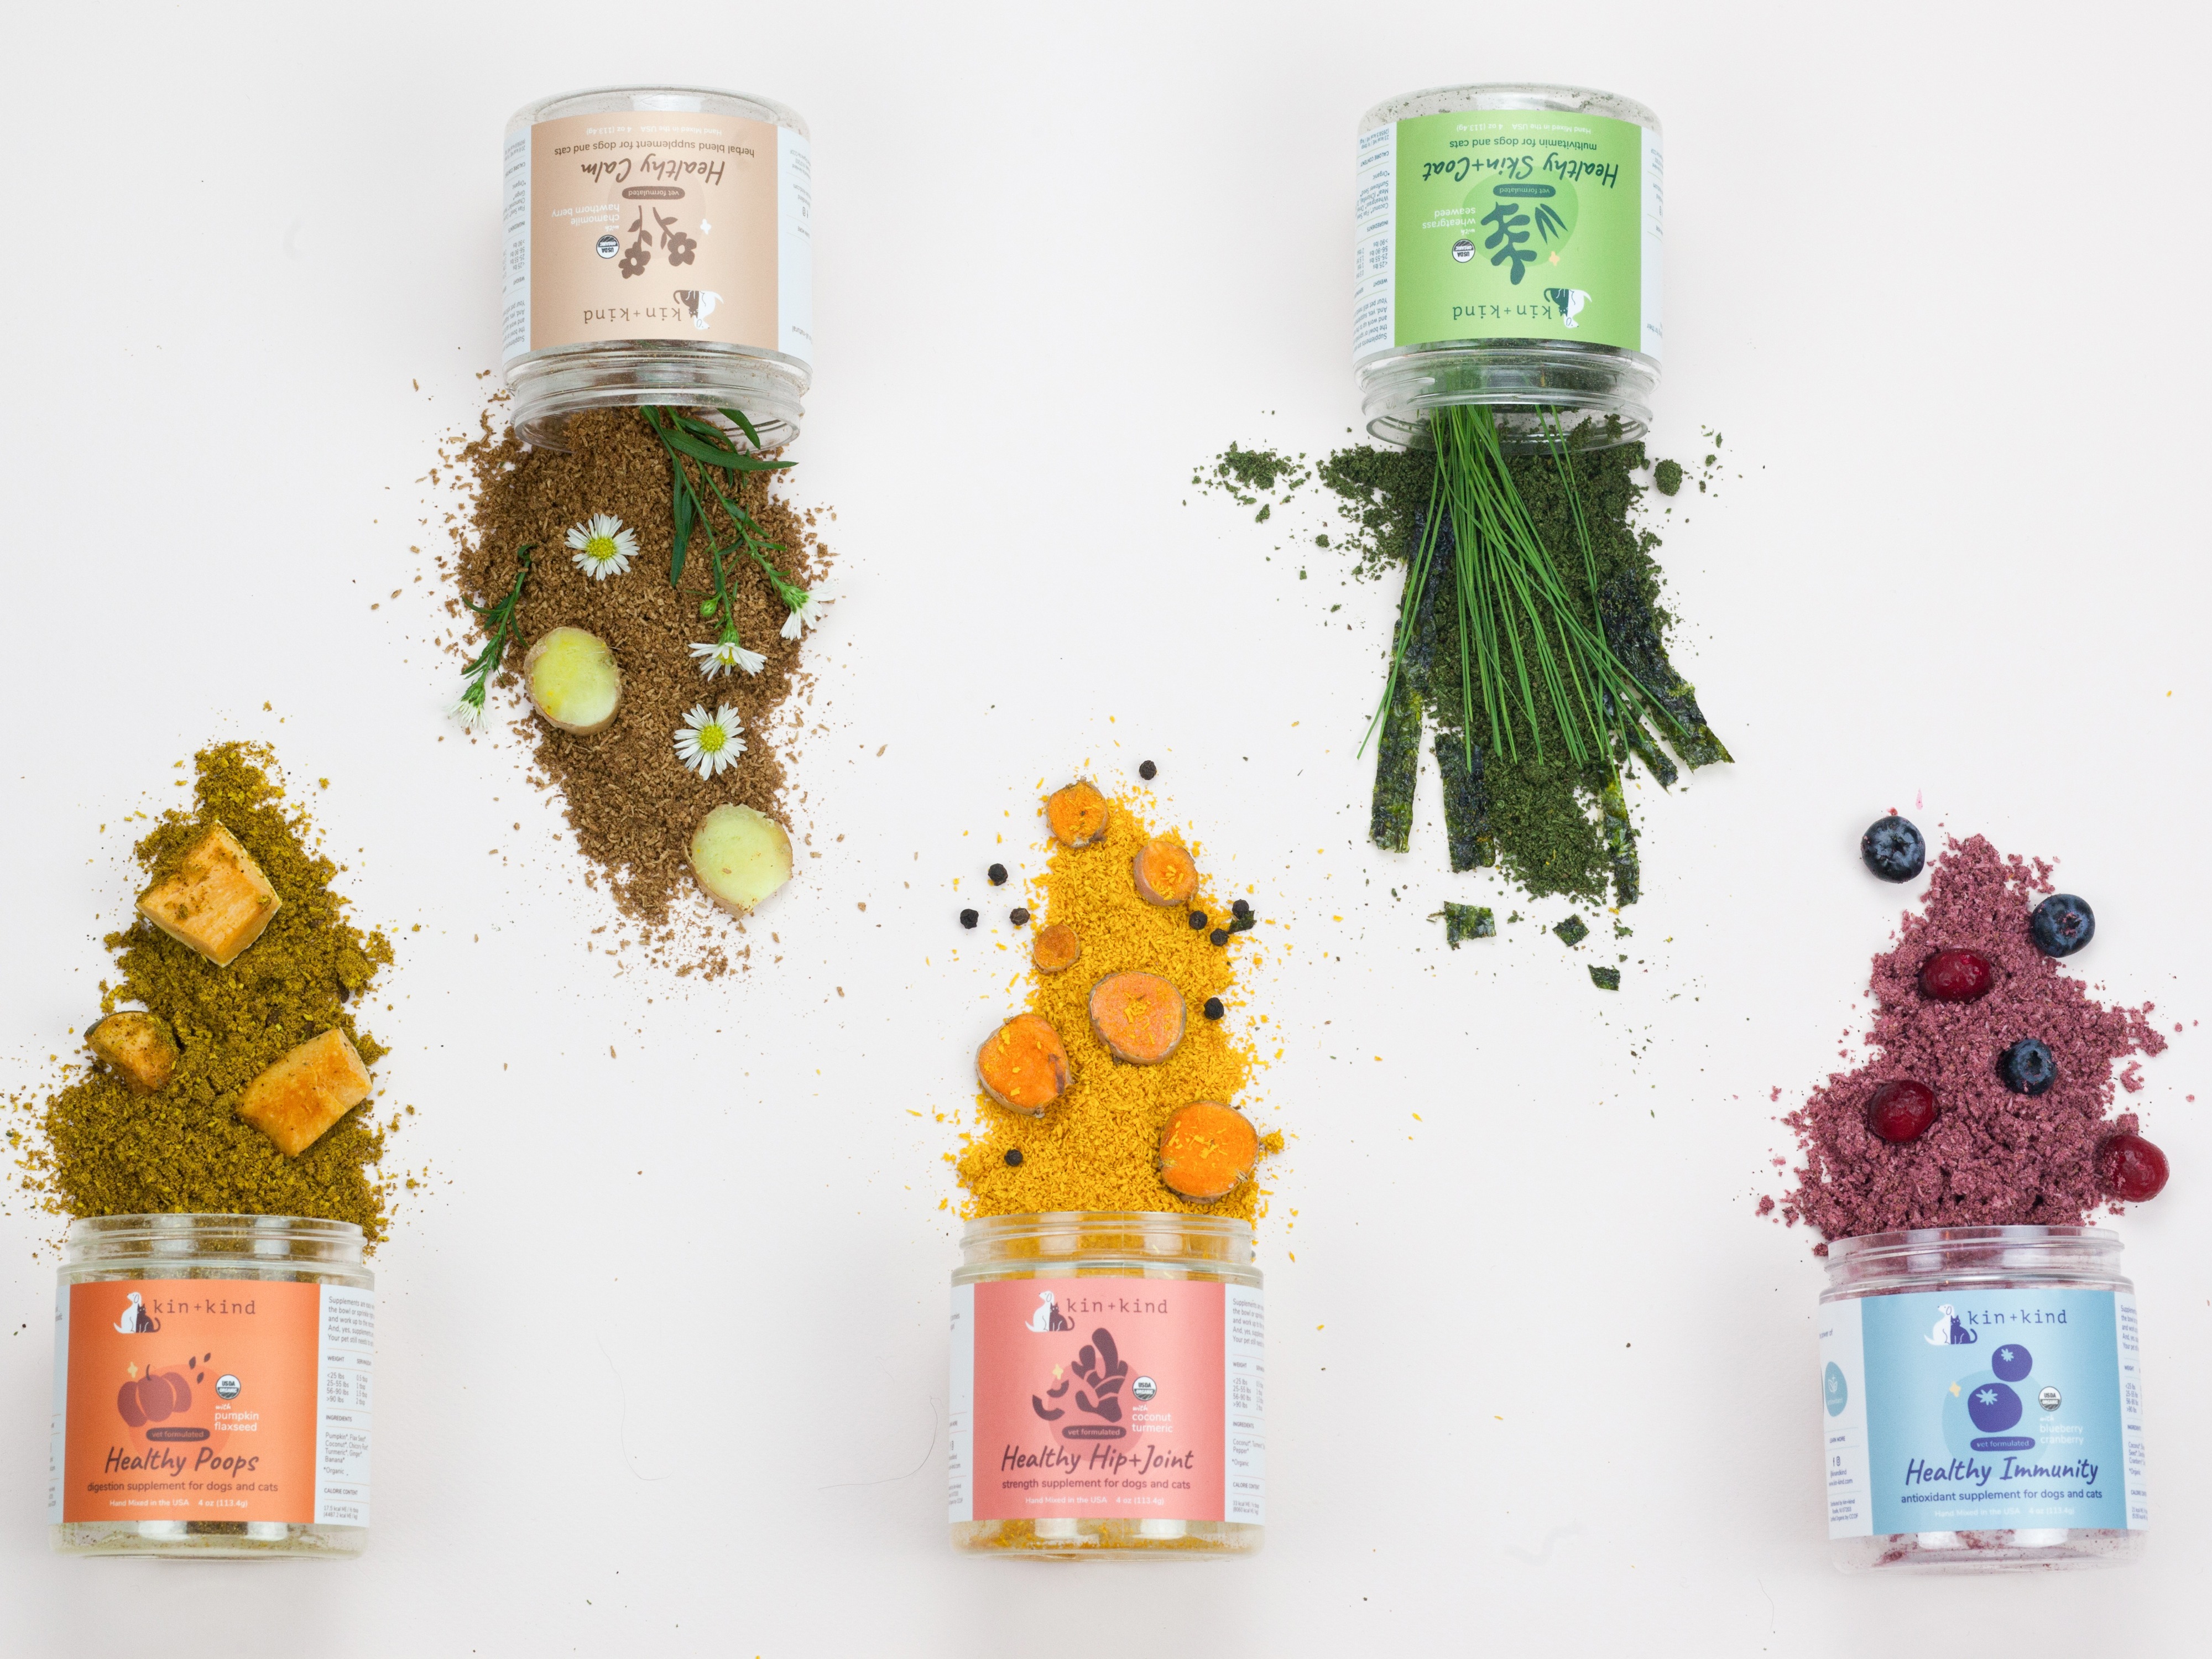 Image of 5 containers of pet supplements with ingredients and powder spilling out